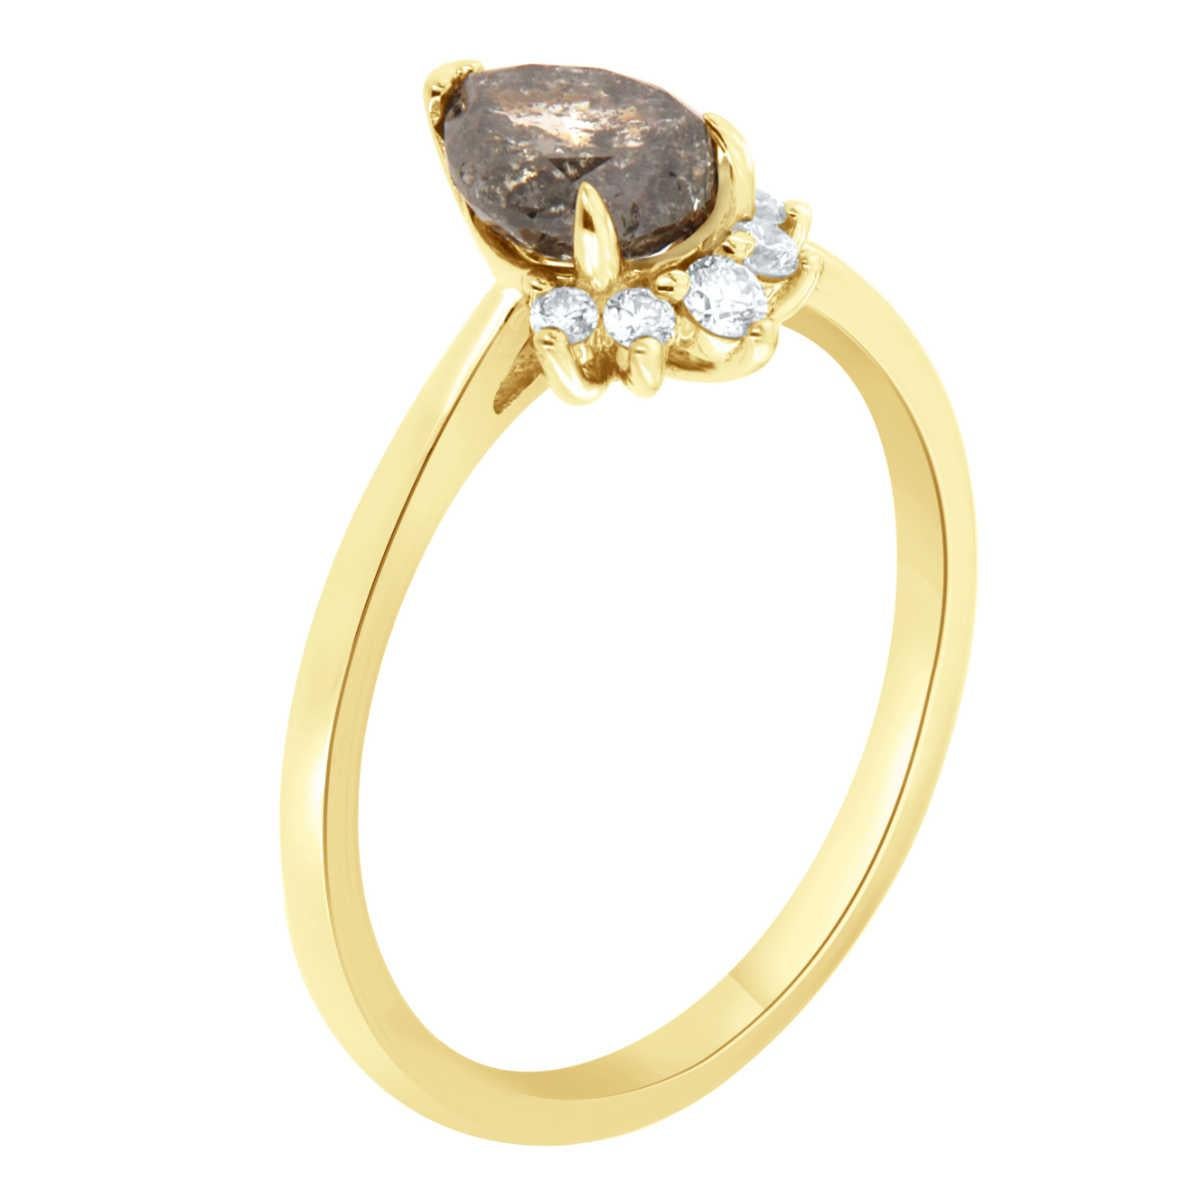 This 14k yellow gold delicate ring features a 0.93 Carat Pear shape Salt & Pepper Natural Diamond partially encircled by a half halo of five (5) brilliant round diamonds on top of a 1.5 MM wide band. 
The total round diamond weight on the ring is